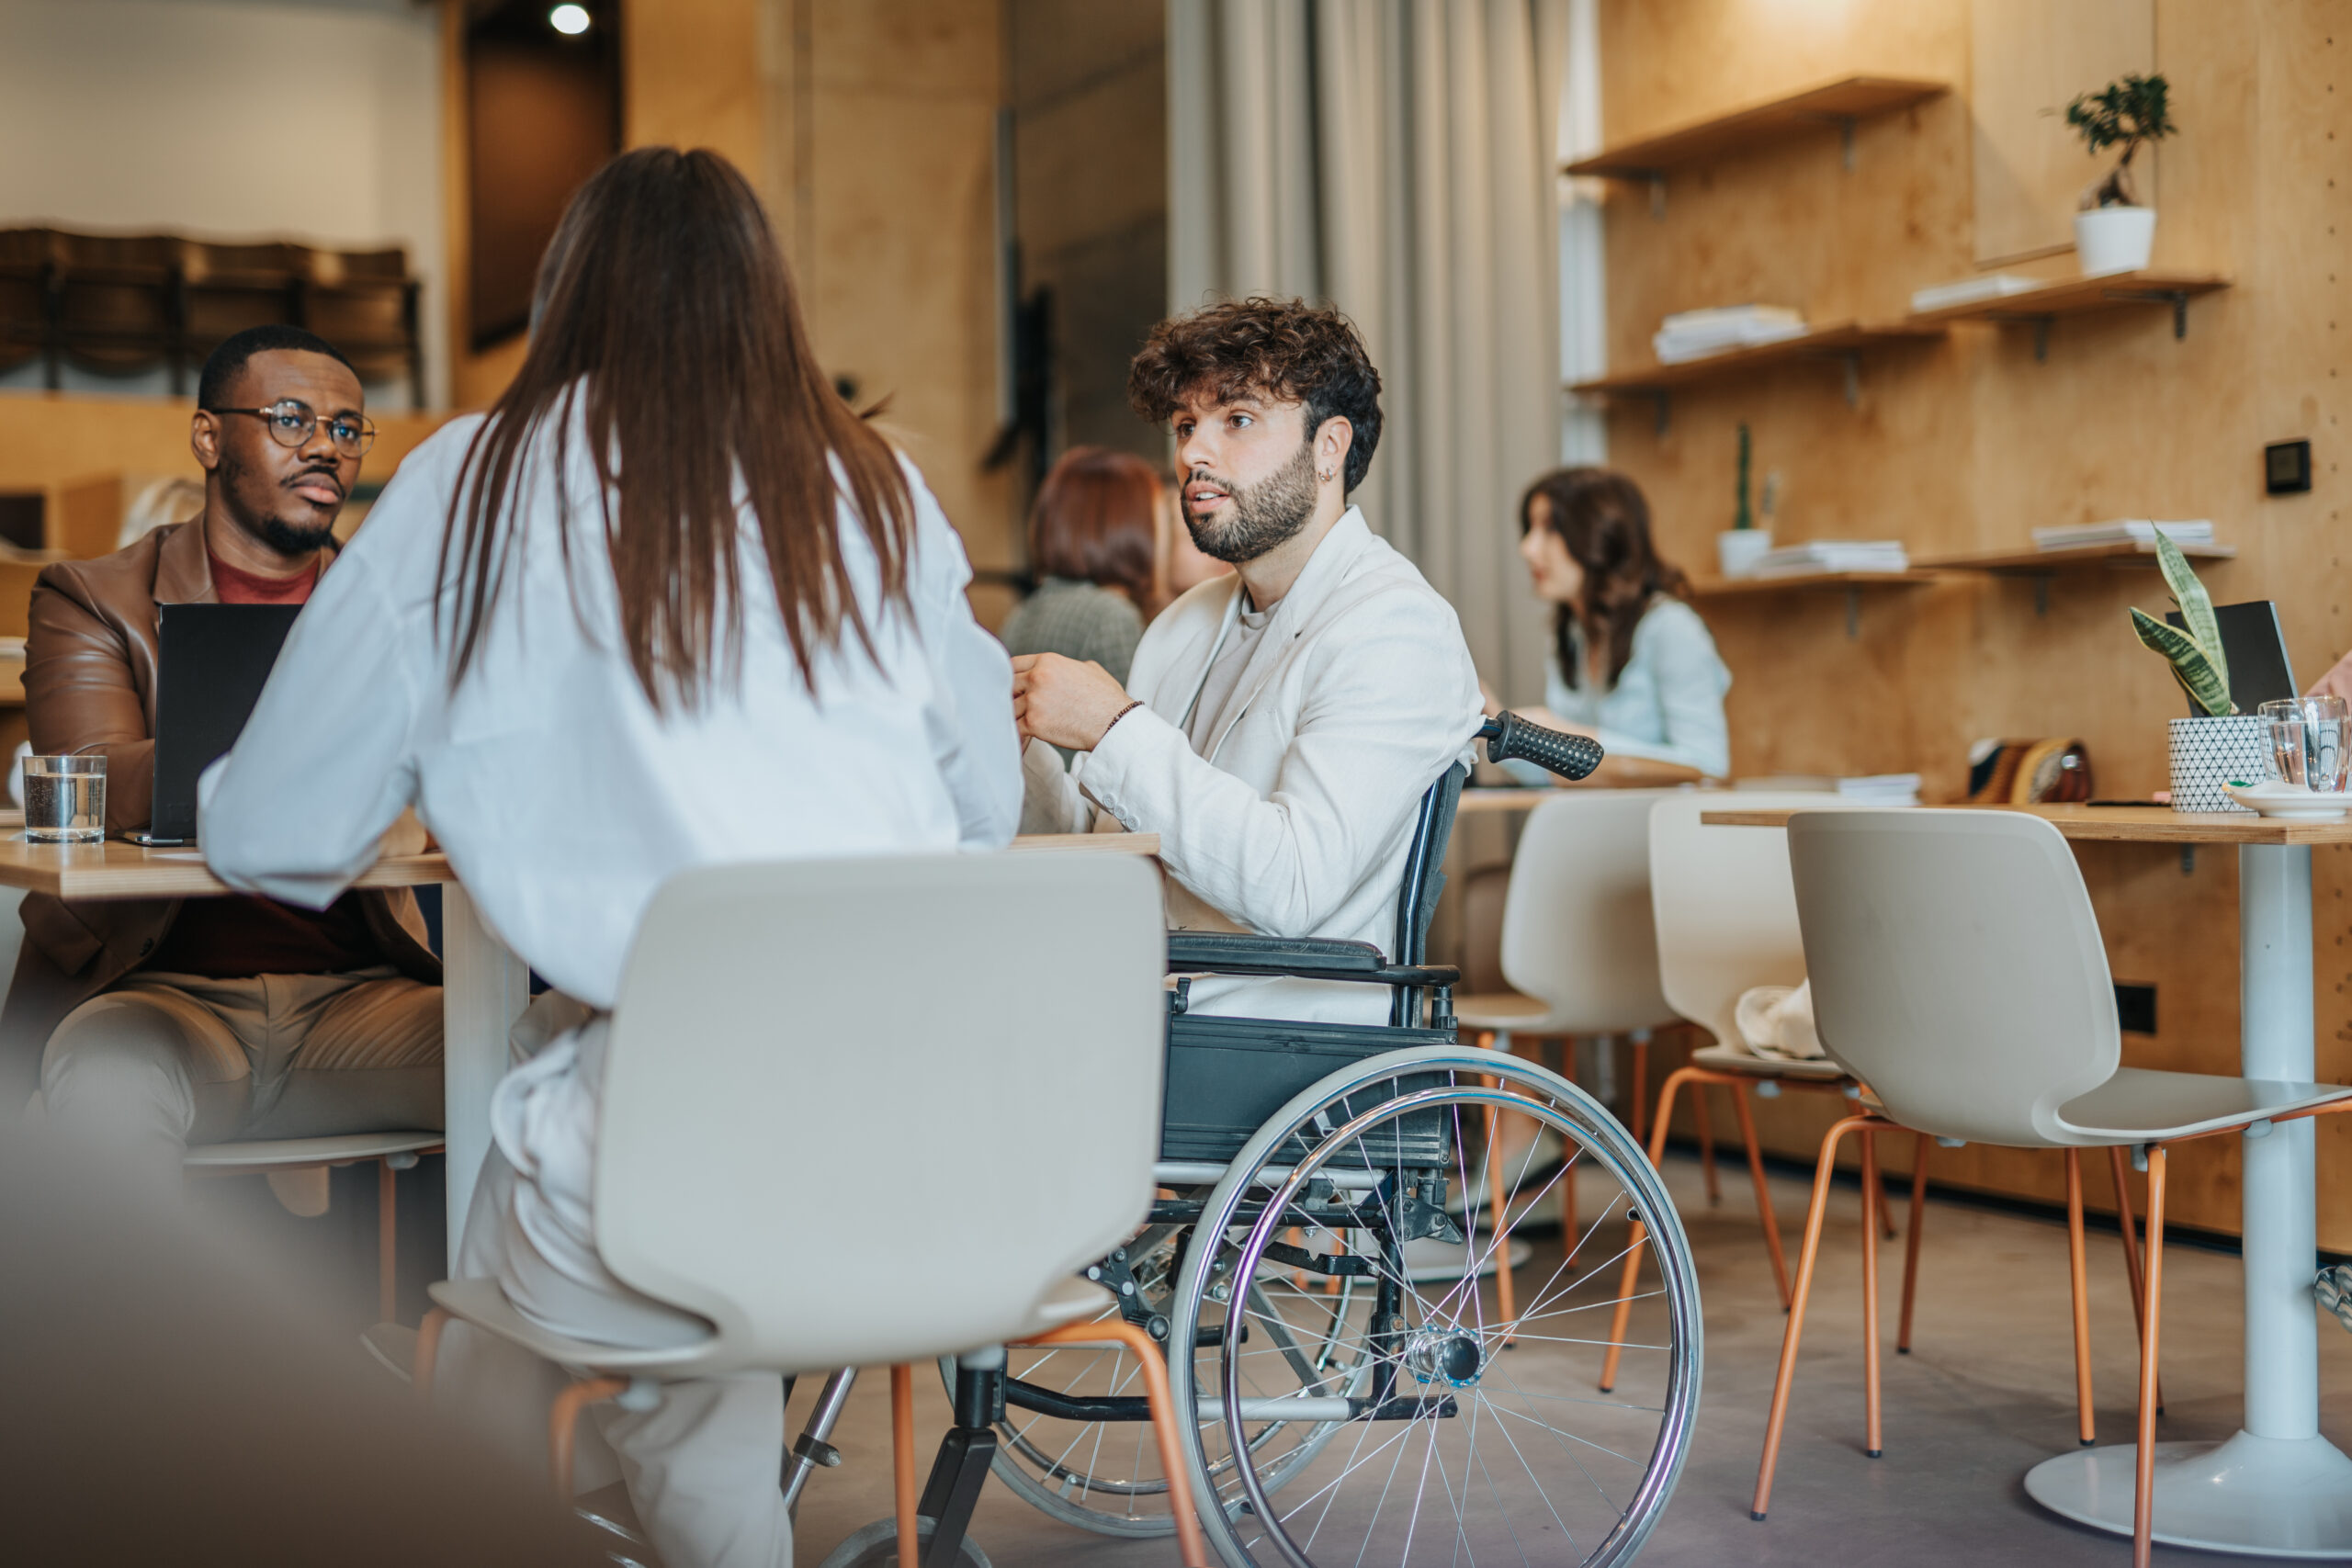 A group of three people sit around a table having a discussion. One man uses a wheelchair. They are working in a modern office or coworking space.